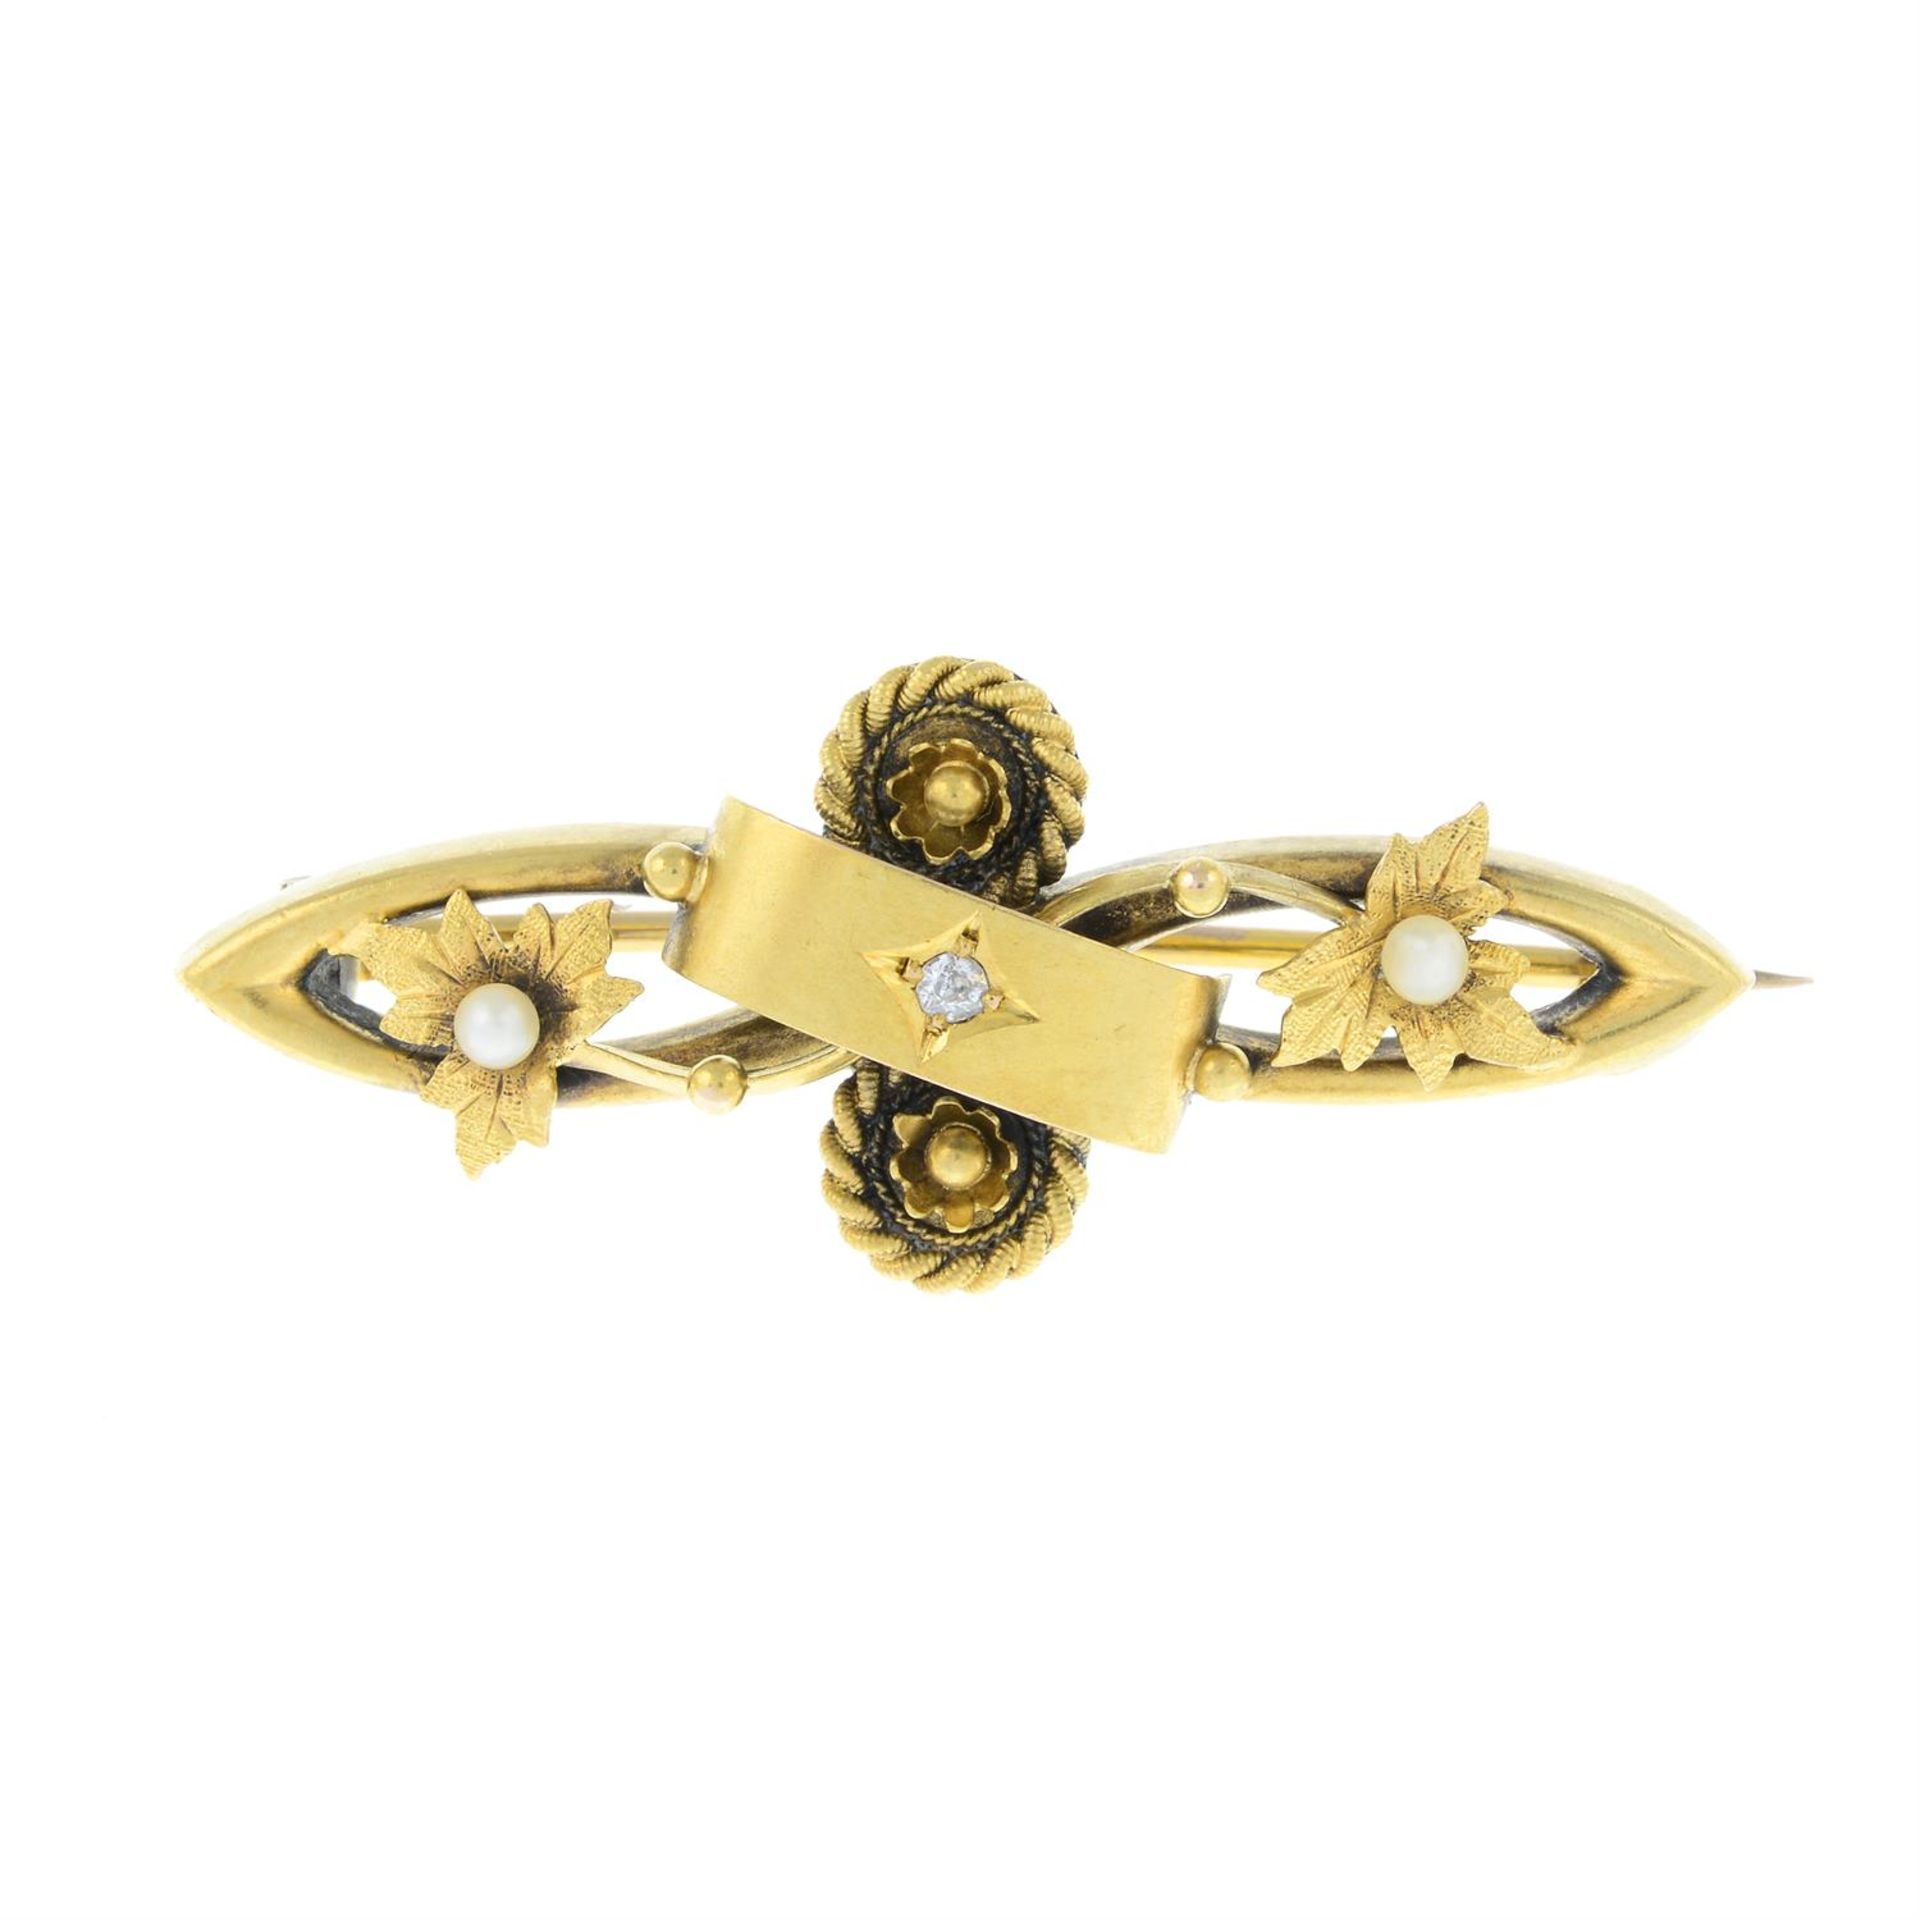 A late Victorian 15ct gold seed pearl and diamond brooch.